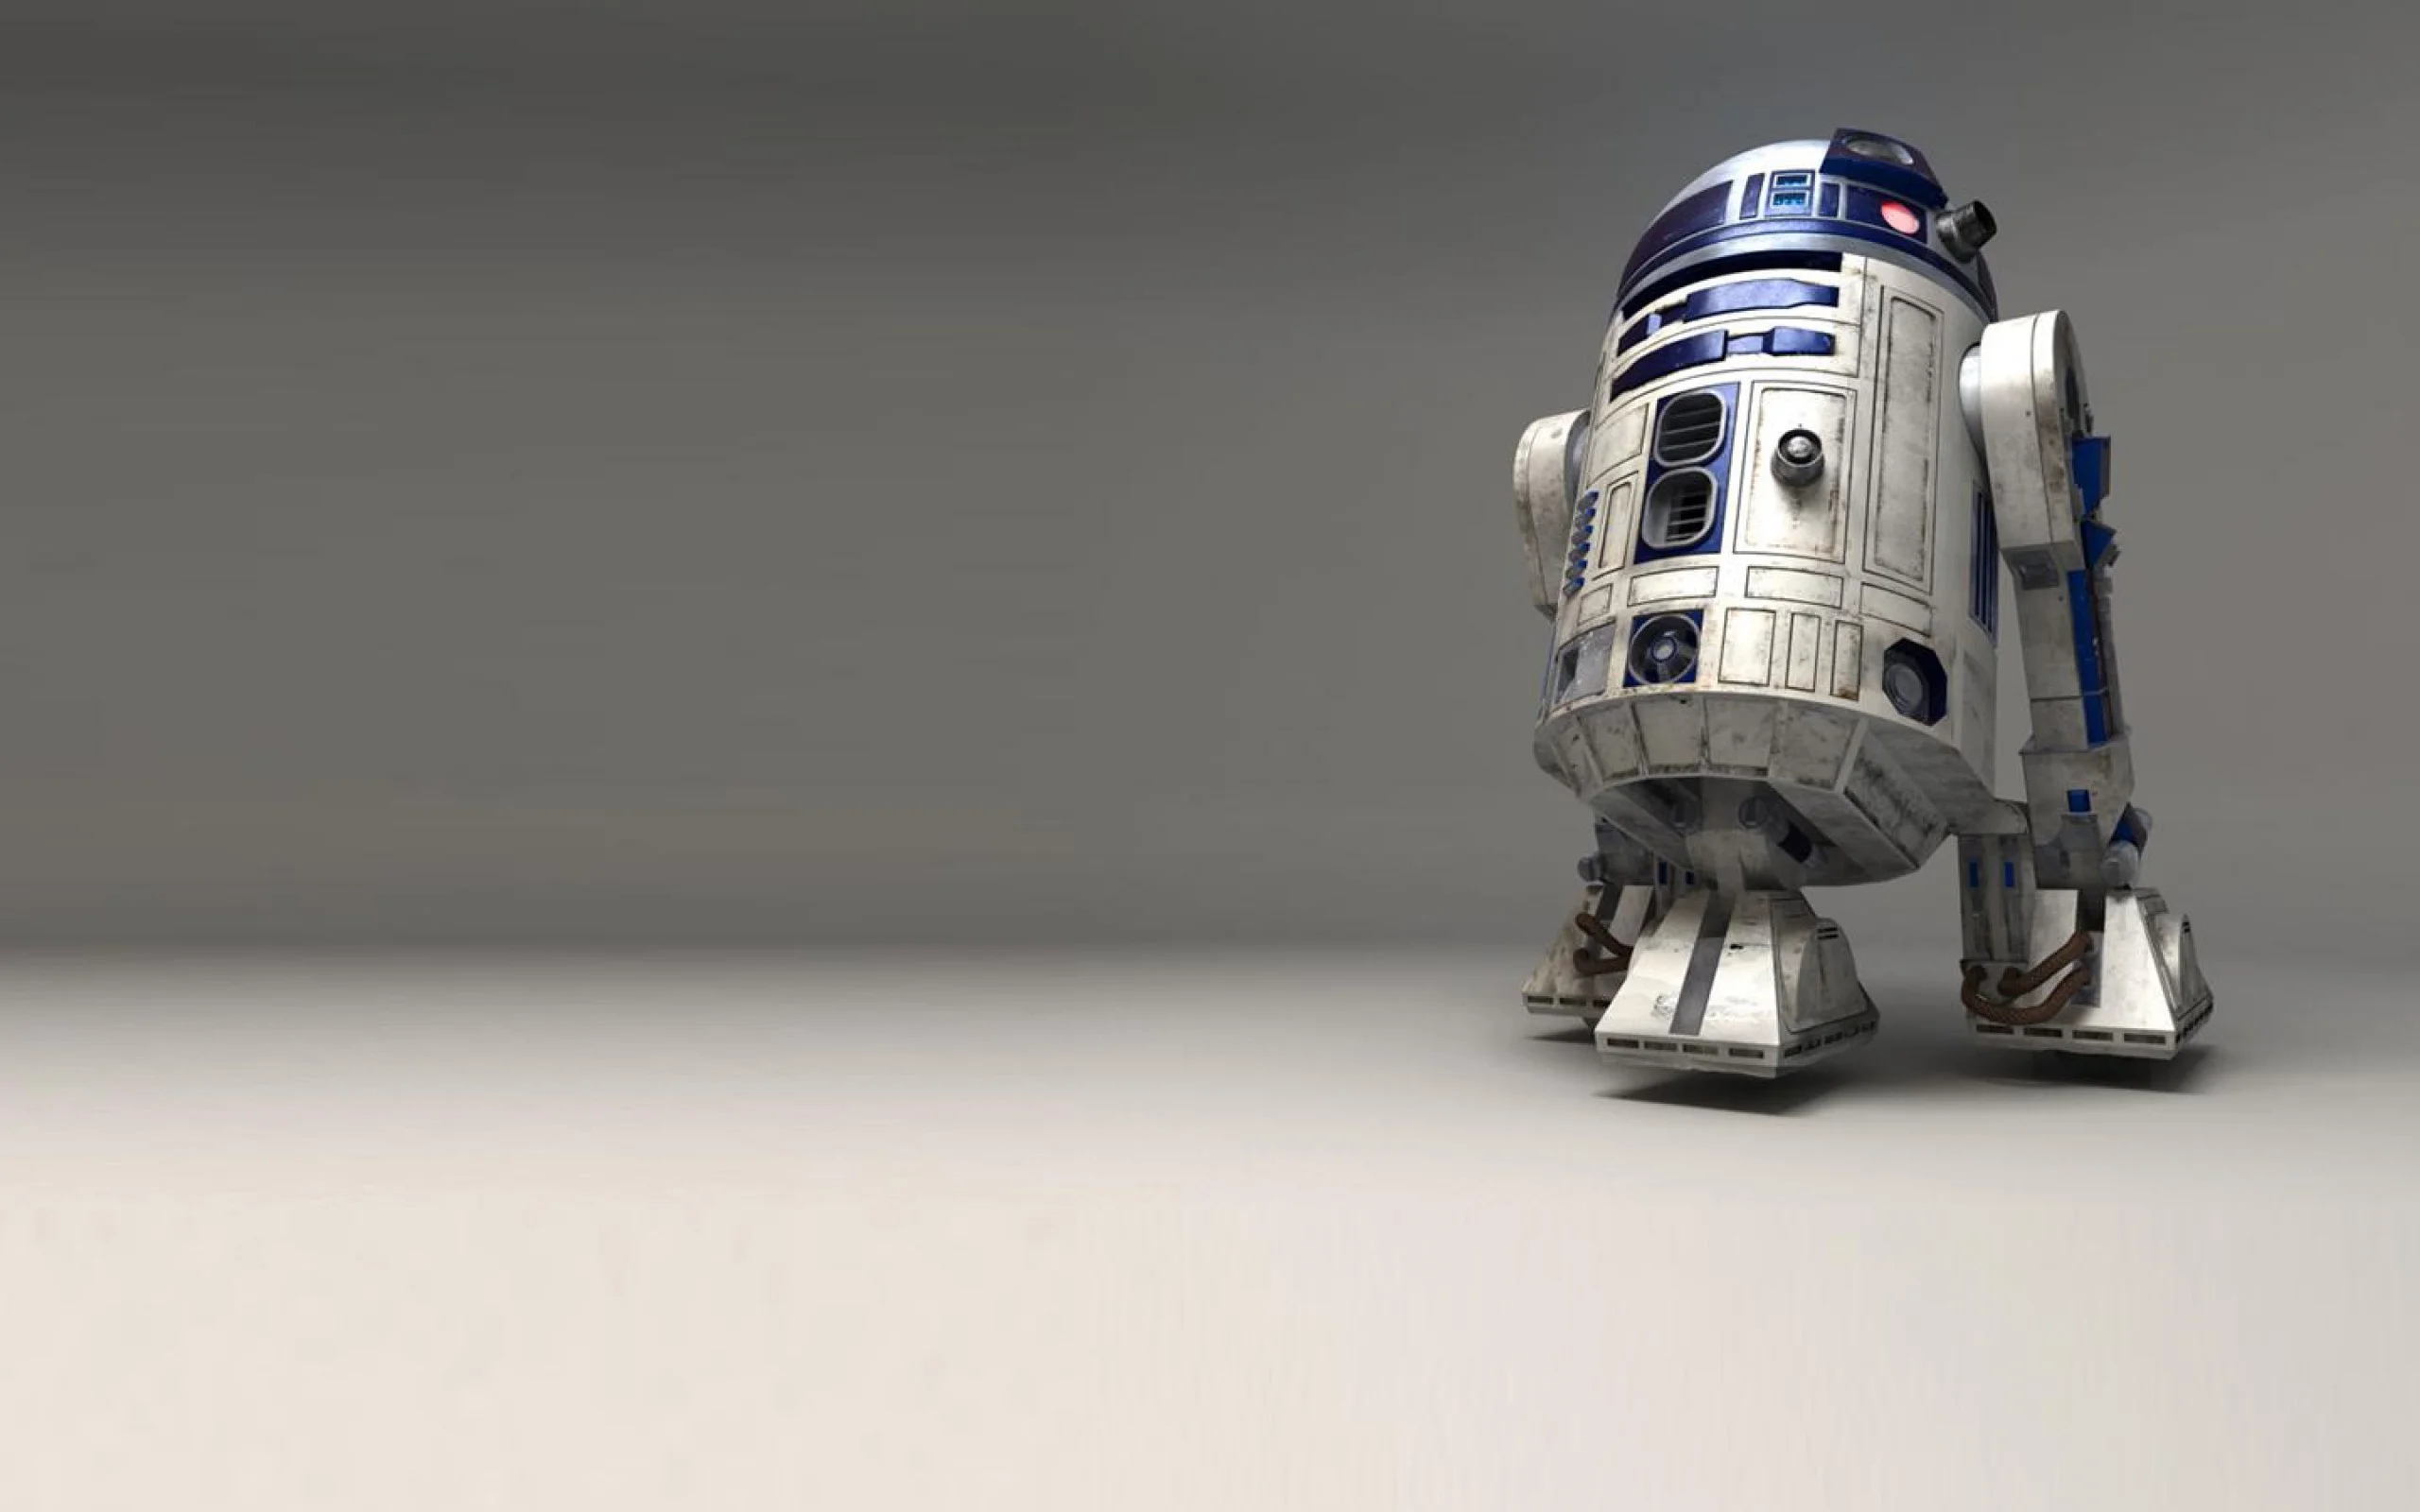 HQ RES Wallpapers of Star Wars HD